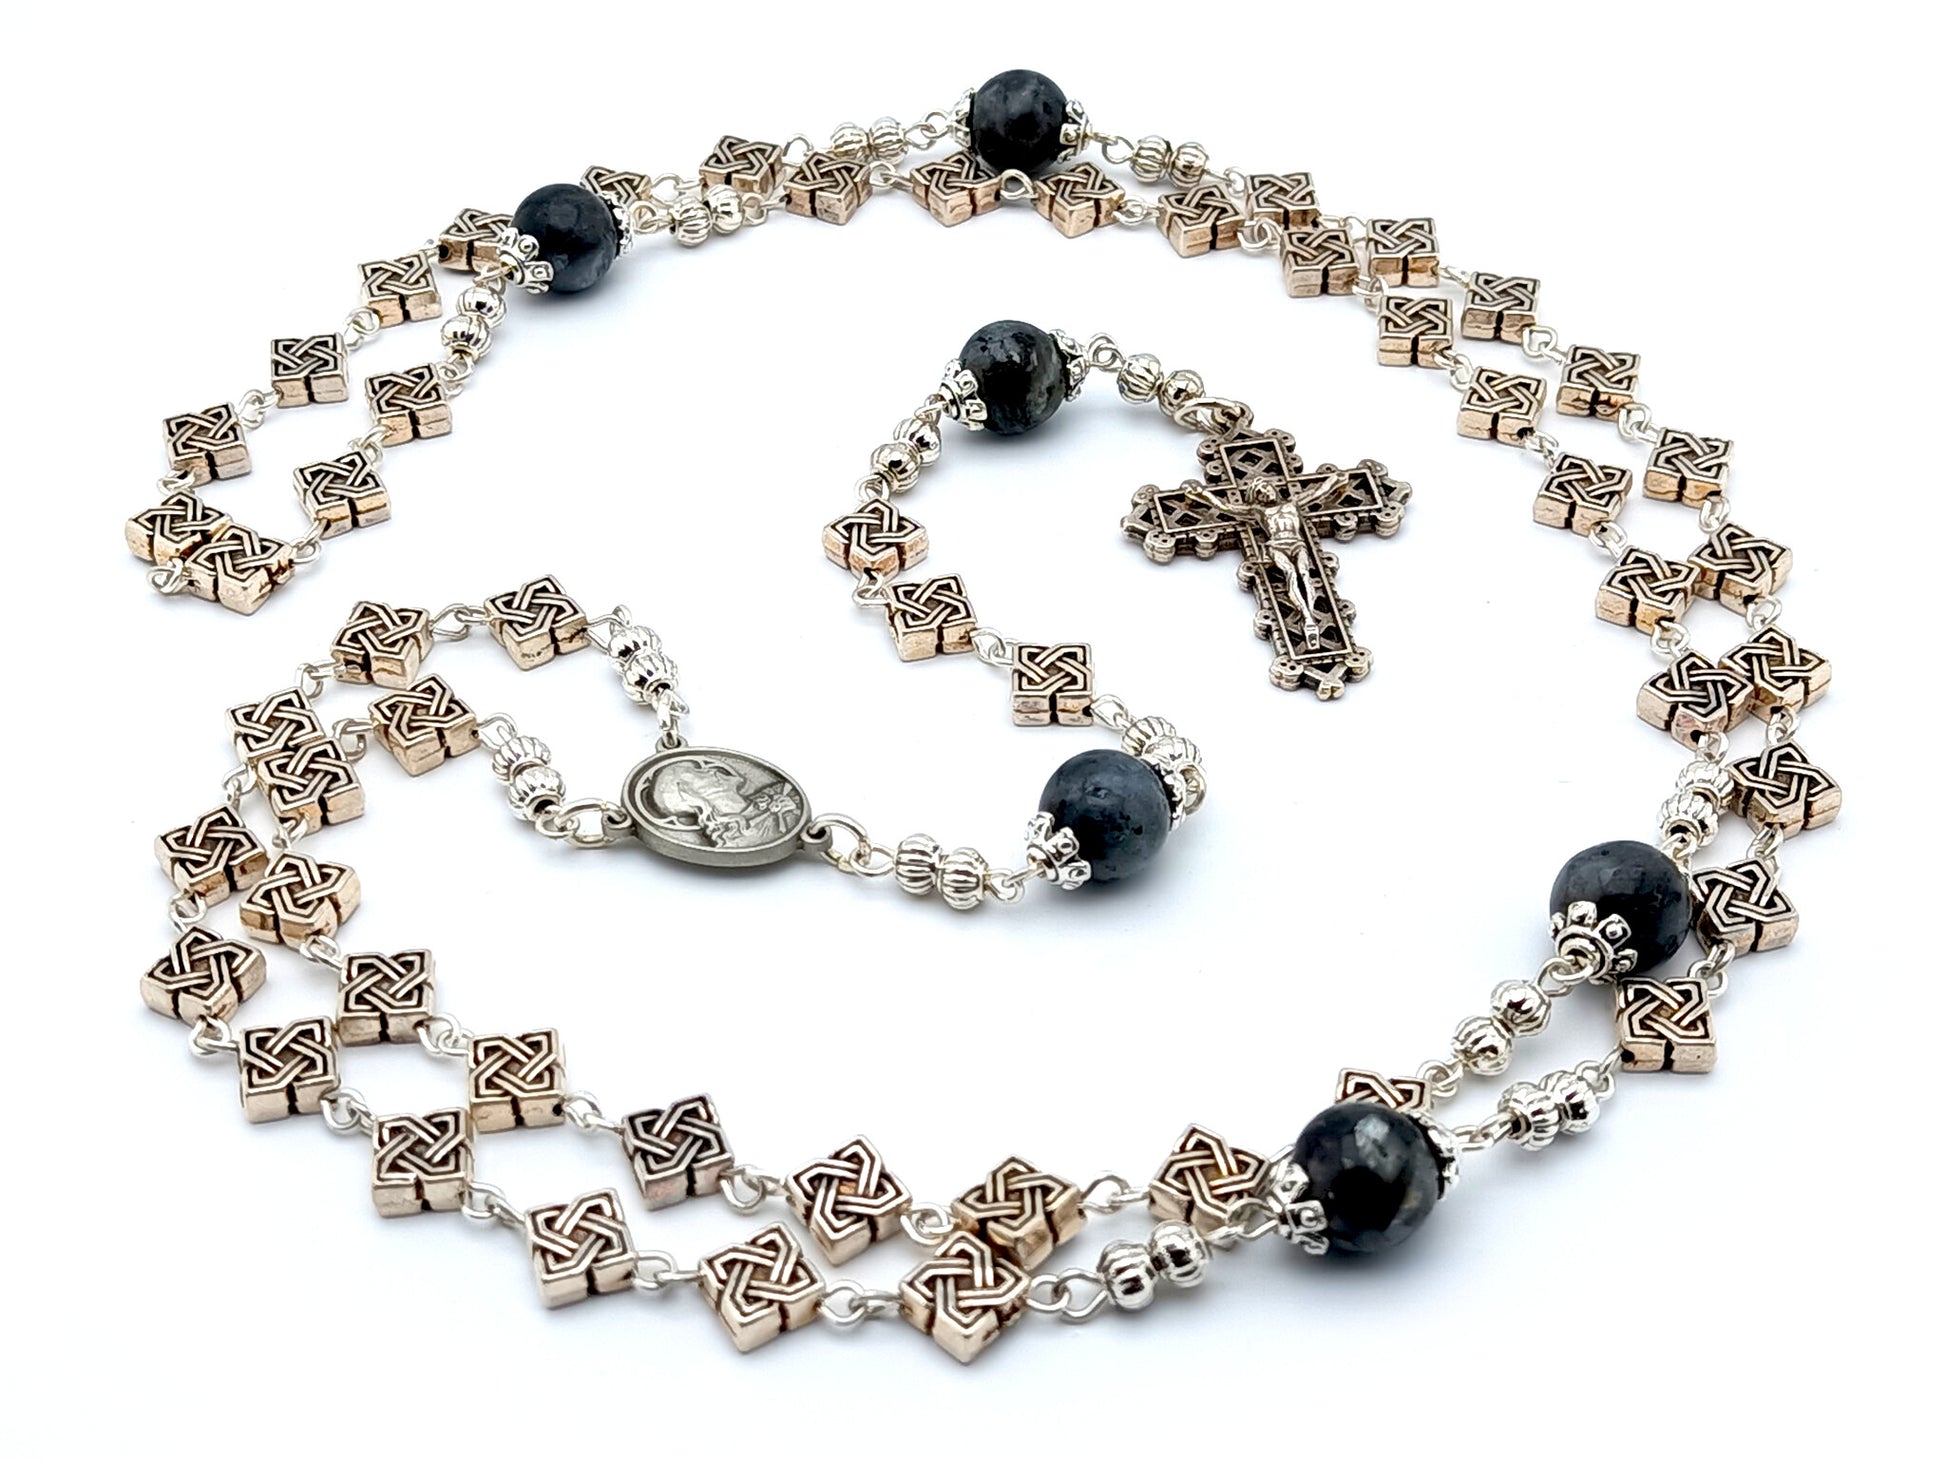 Brown Scapular unique rosary beads with silver Celtic cross and gemstone beads, silver crucifix and centre medal.